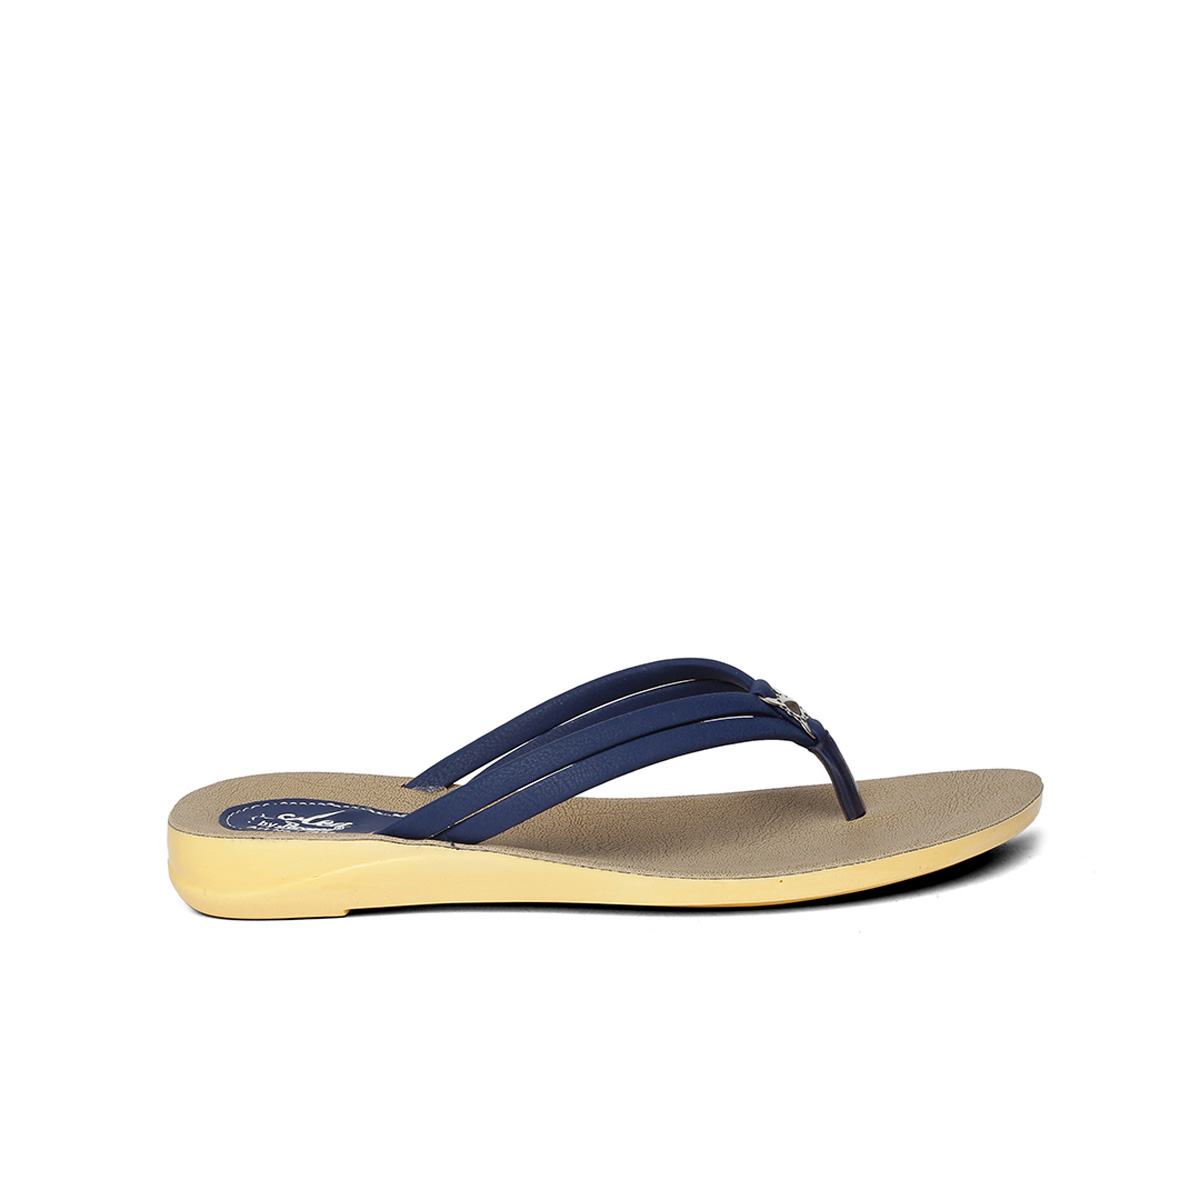 Buy Paragon-Solea Men's Blue Slippers Online @ ₹235 from ShopClues